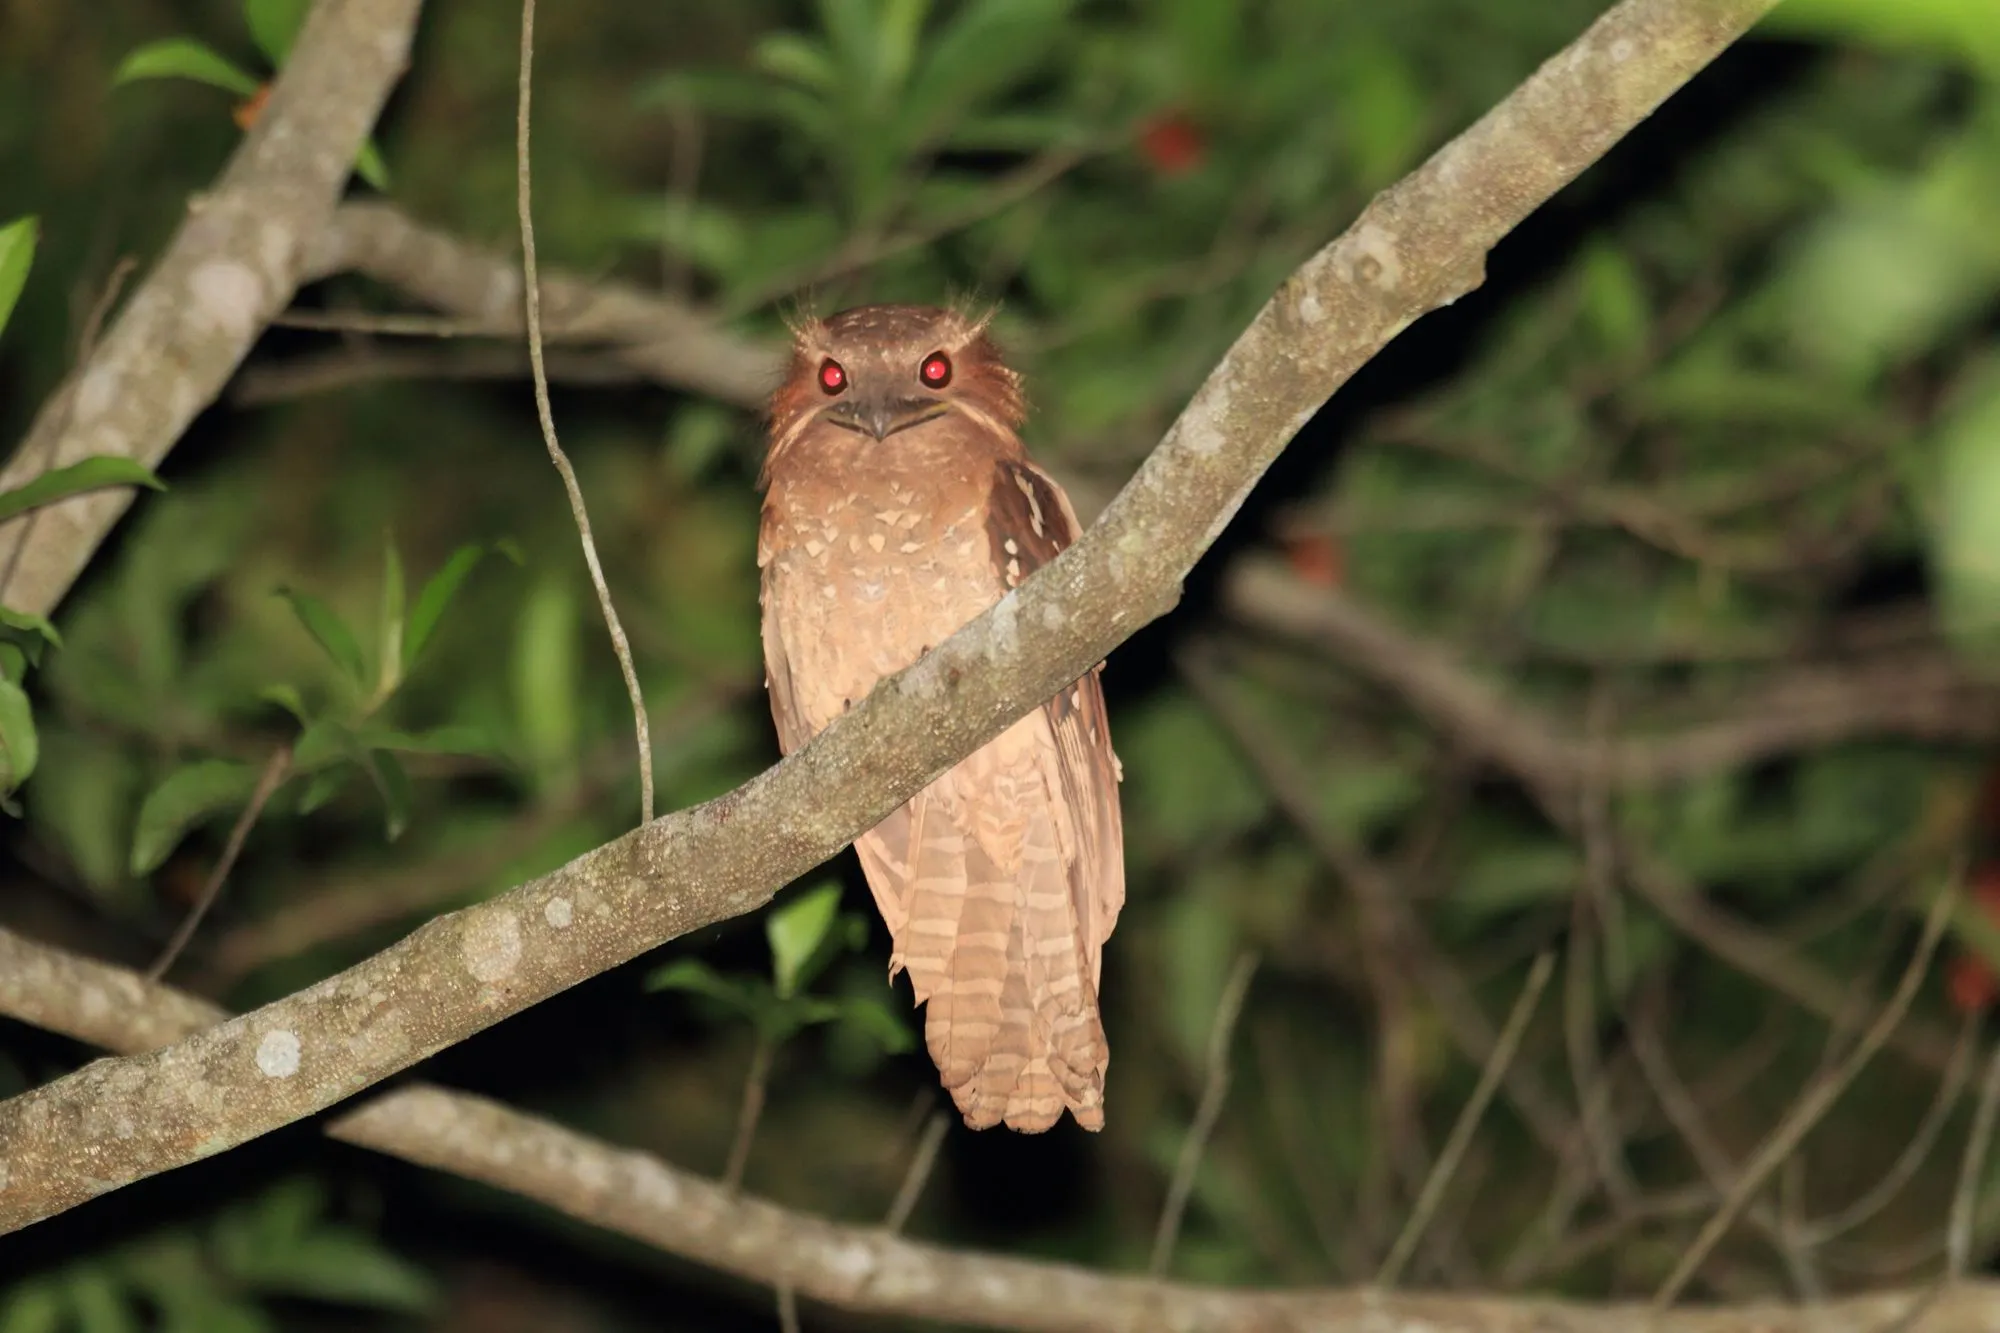 Large frogmouth